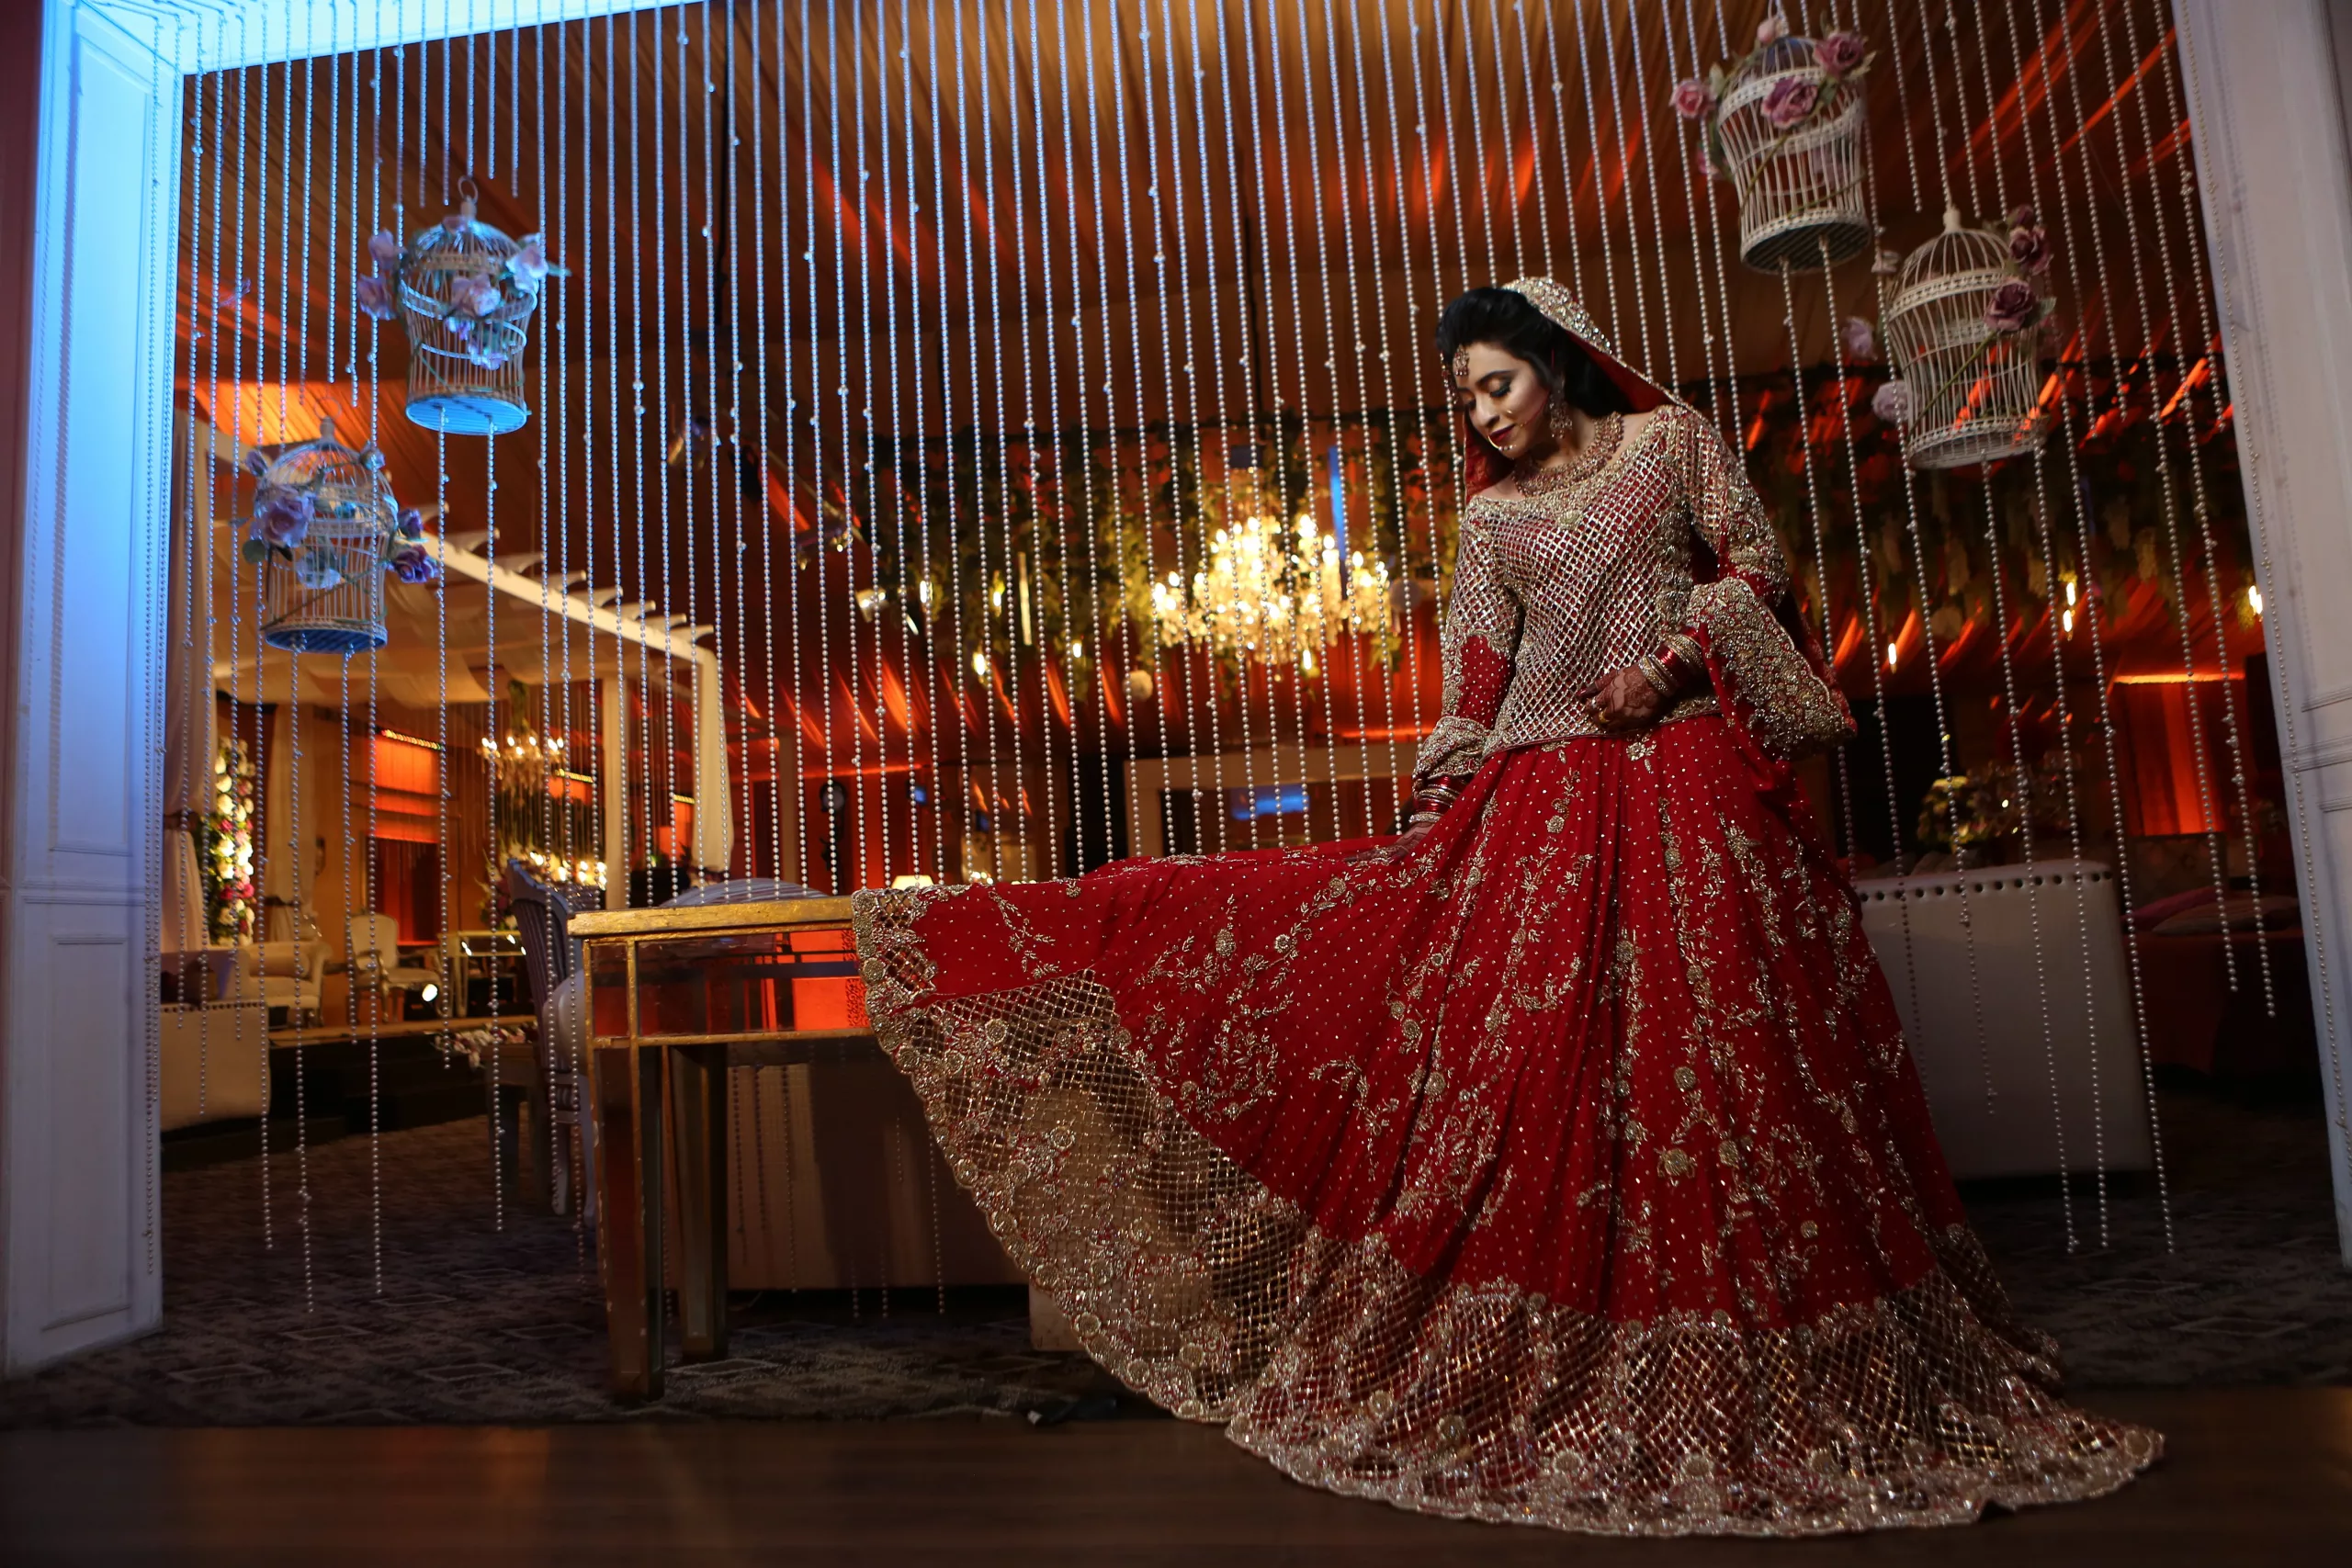 Beautiful Bride Wearing Red Heavy Dress Sitting on a Table